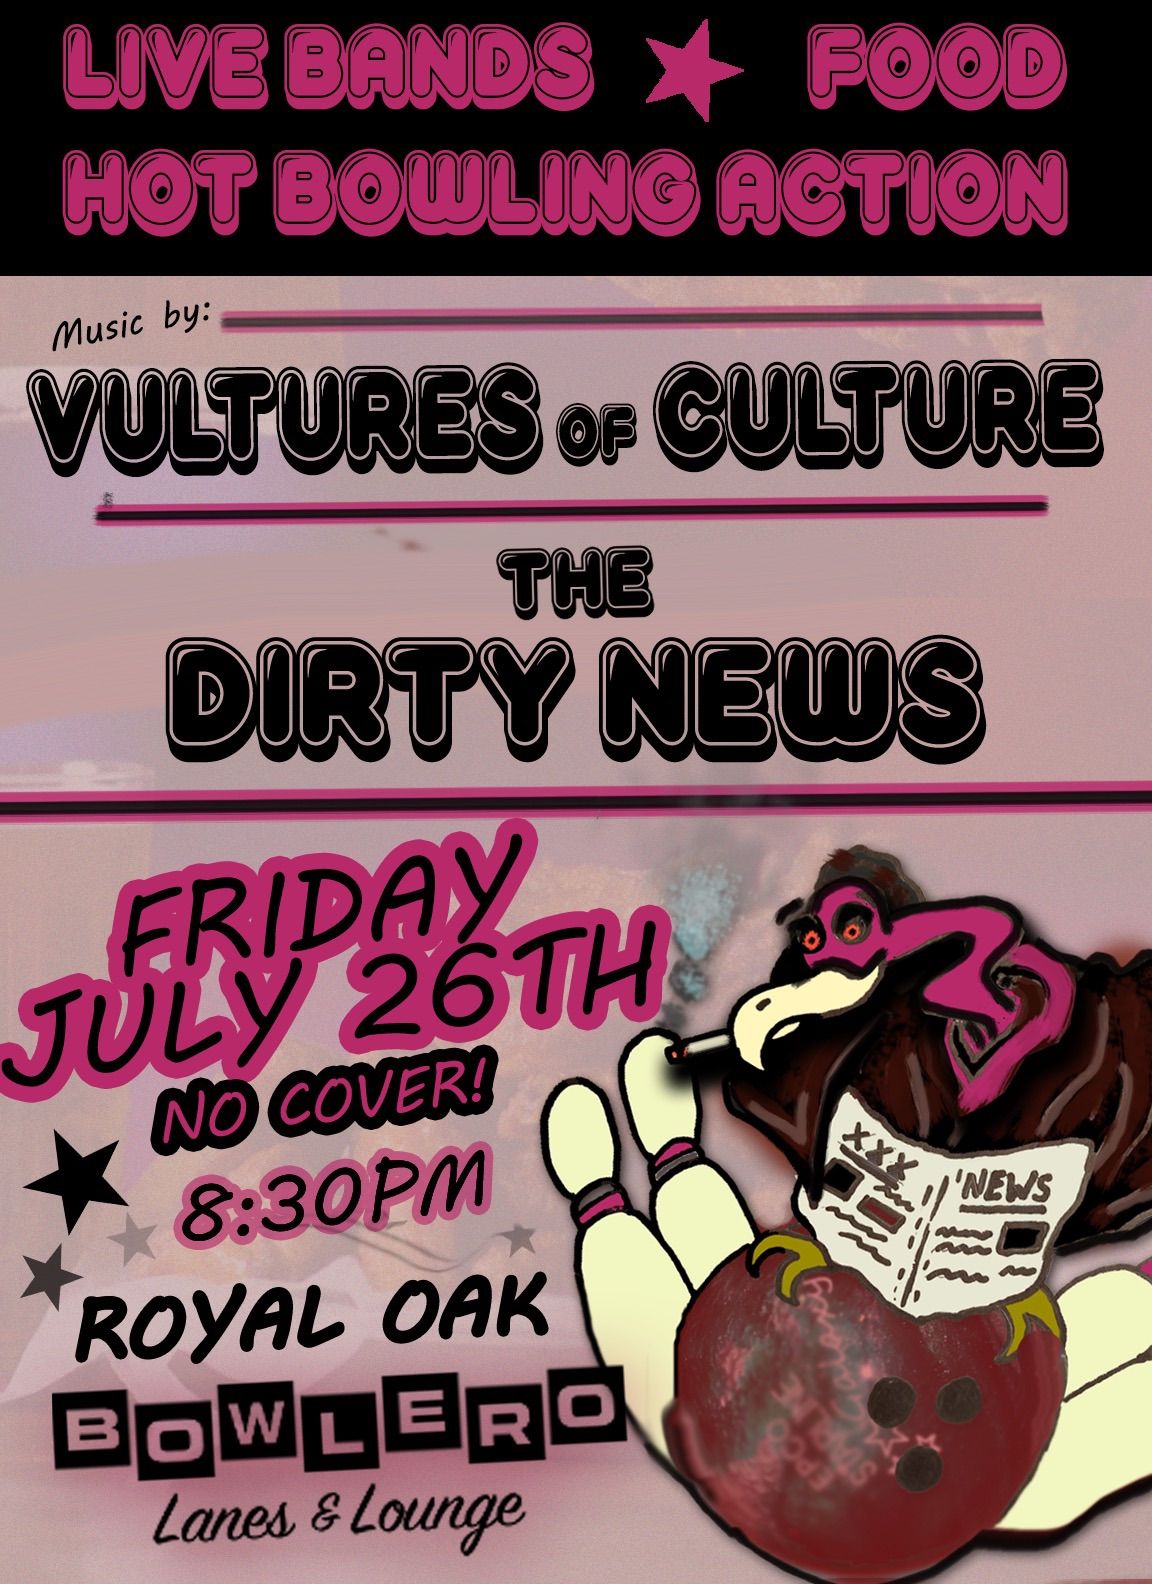 Vultures of Culture and The Dirty News rock Bowlero